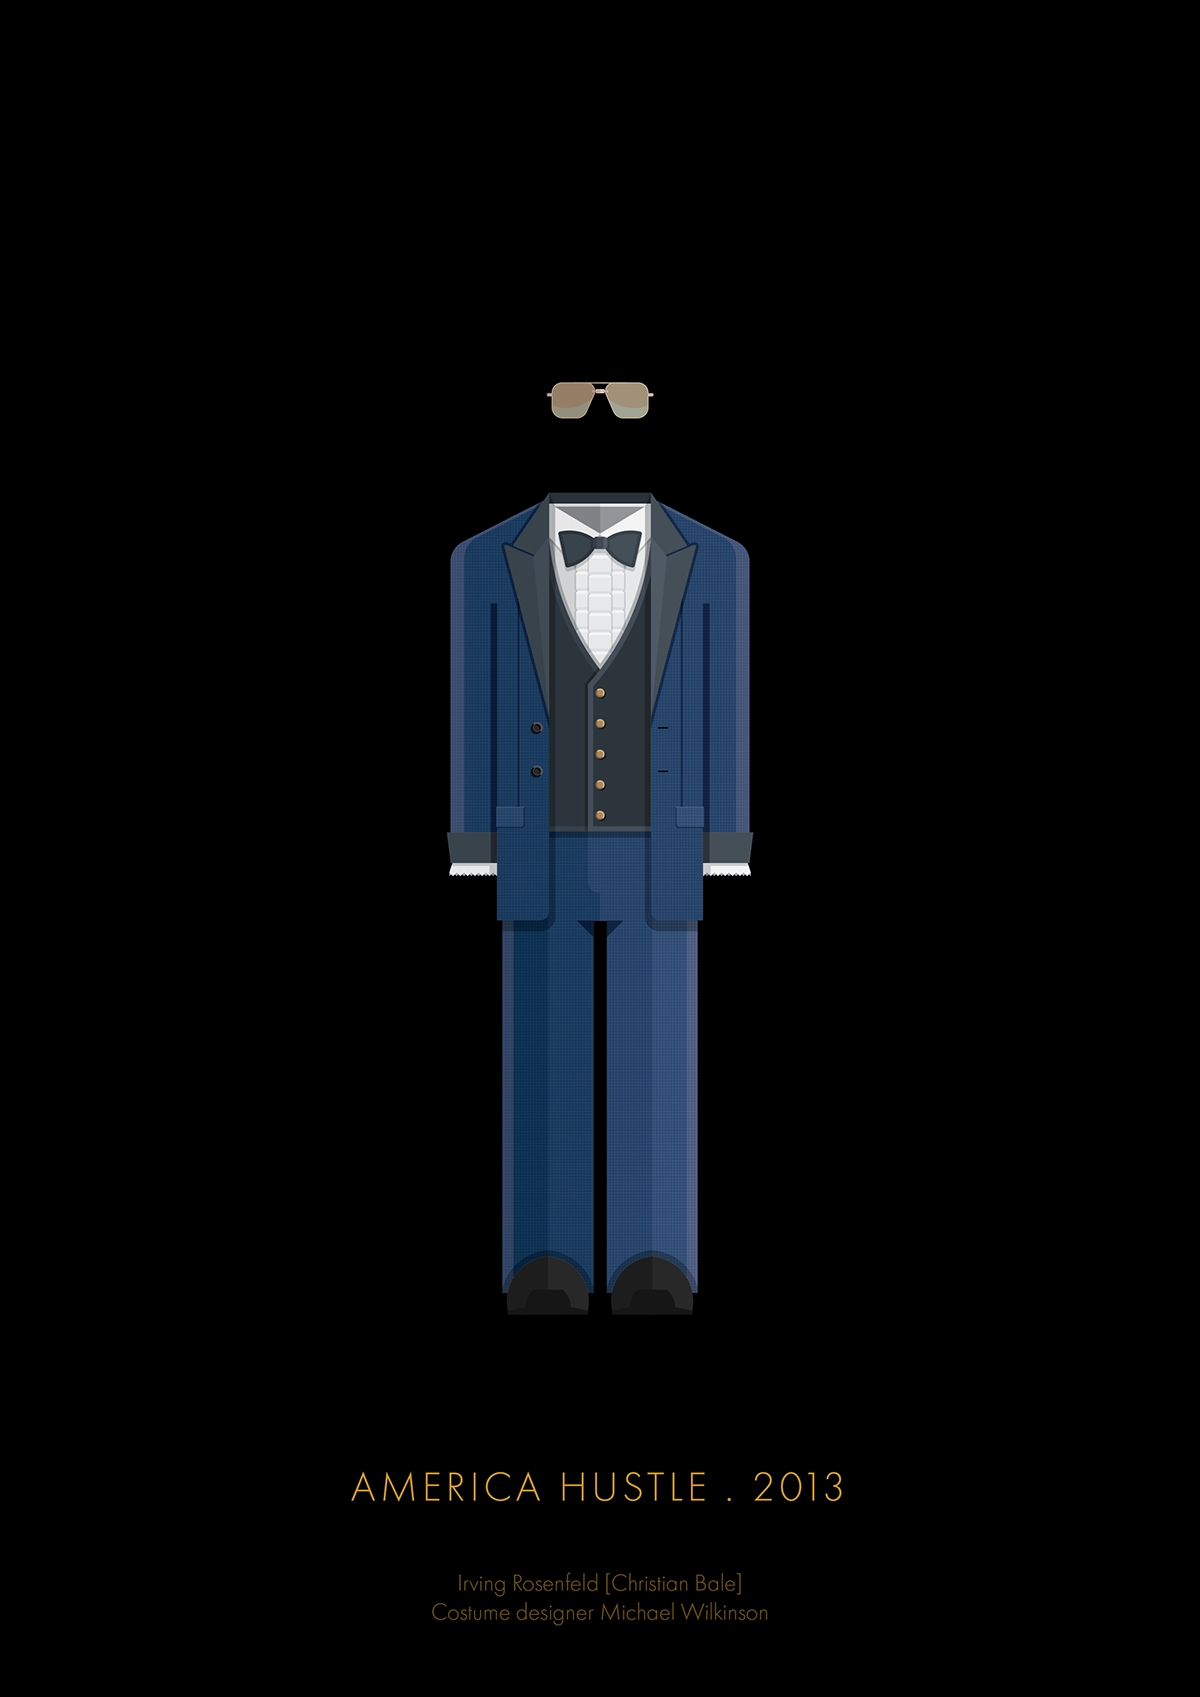 oscar hllywoodcostume famouscostumes The Great Gatsby django dallas buyers club American Hustle The Huger Games lincoln argo Pirates of Caribbean captain american social network harry potter